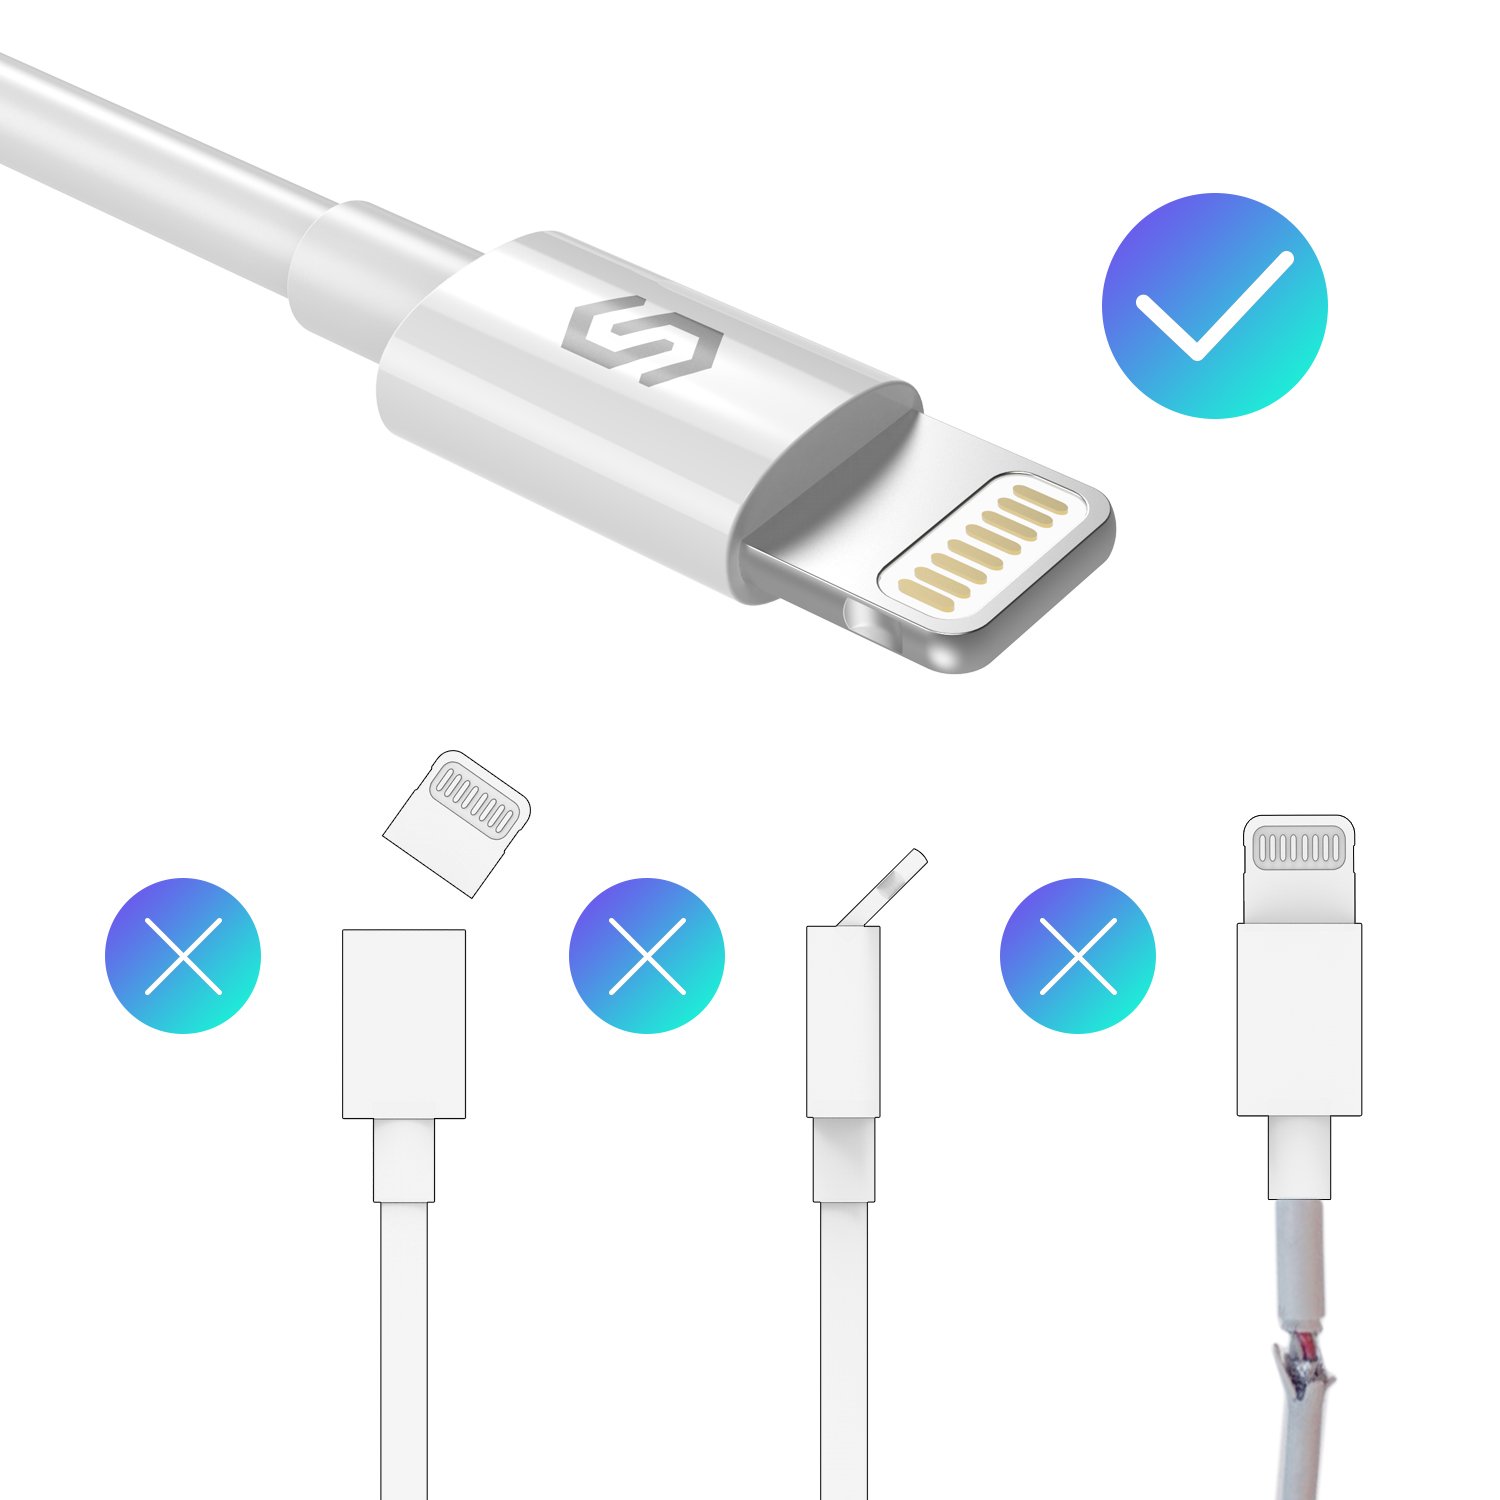 iPhone Charger Syncwire Lightning Cable - [Apple MFi Certified] 3.3Ft/1M High Speed Apple Charger Cable Cord USB Fast Charging Cable for iPhone 11 XS Max X XR 8 7 6S 6 Plus SE 5 5S 5C, iPad, iPod